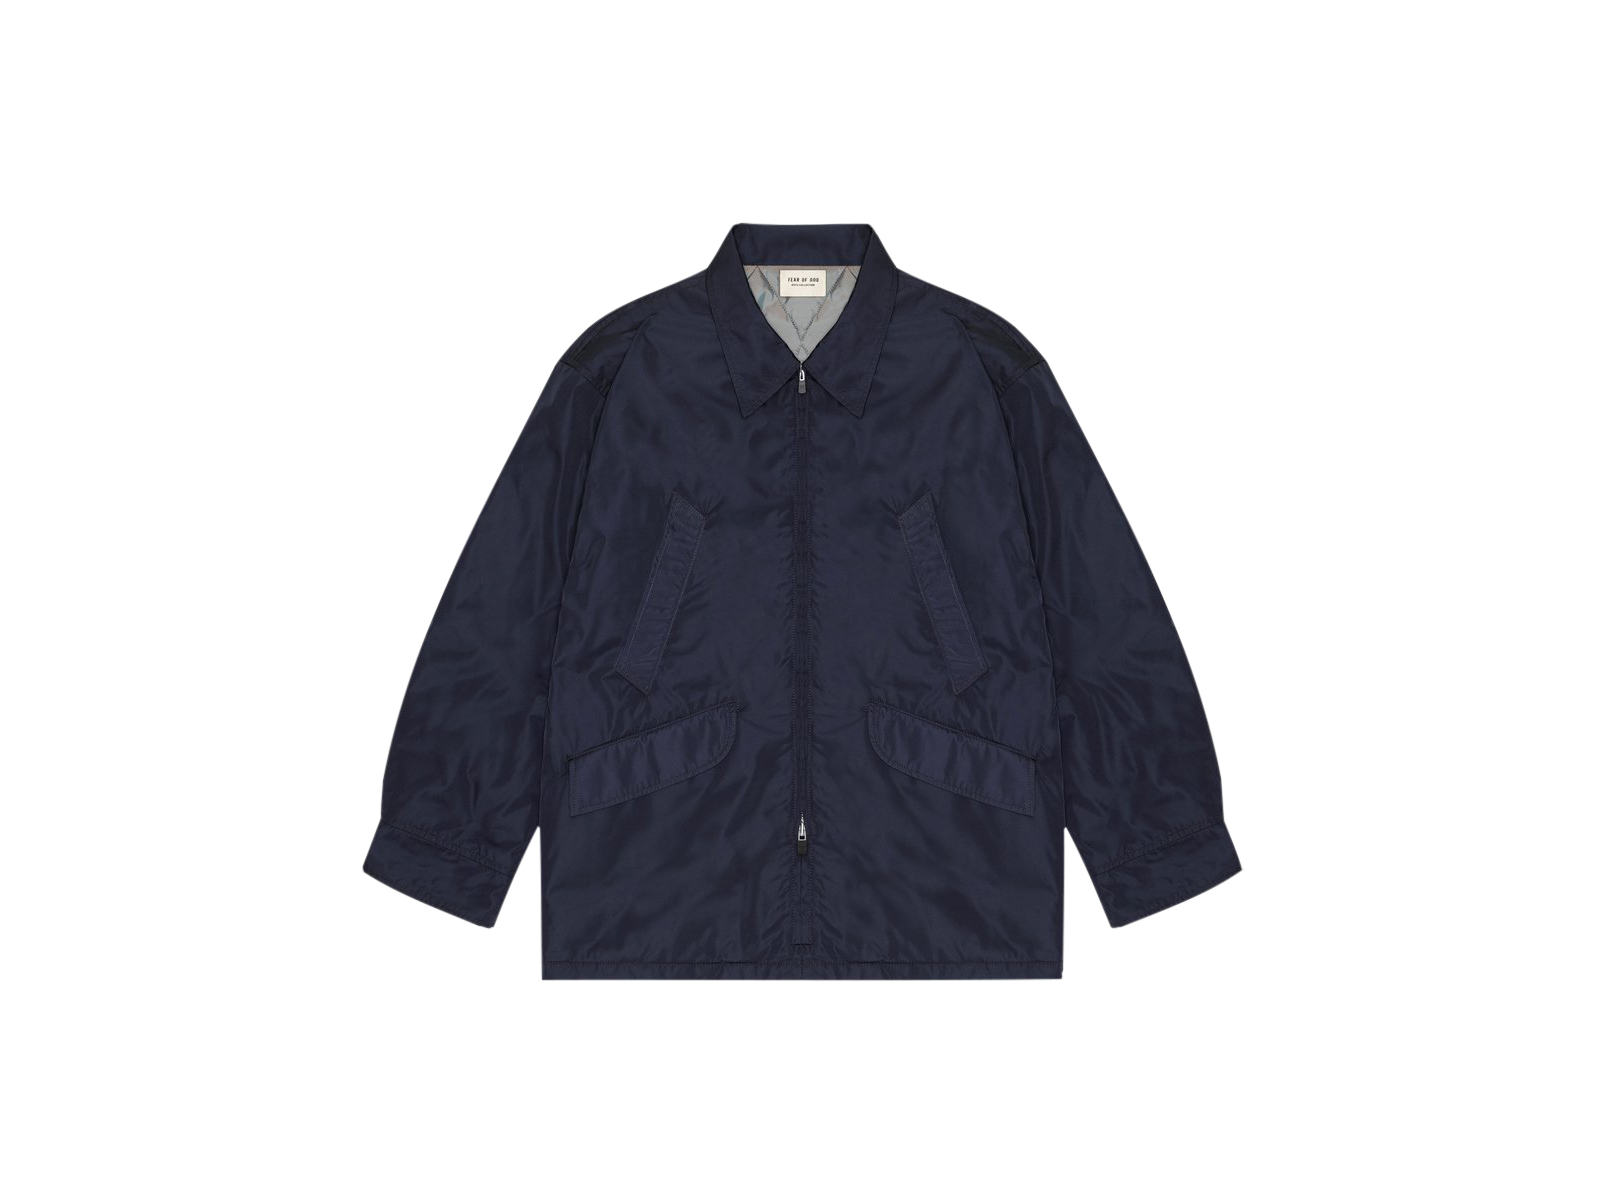 FEAR OF GOD Nylon Field Jacket Navy - SIXTH COLLECTION - US